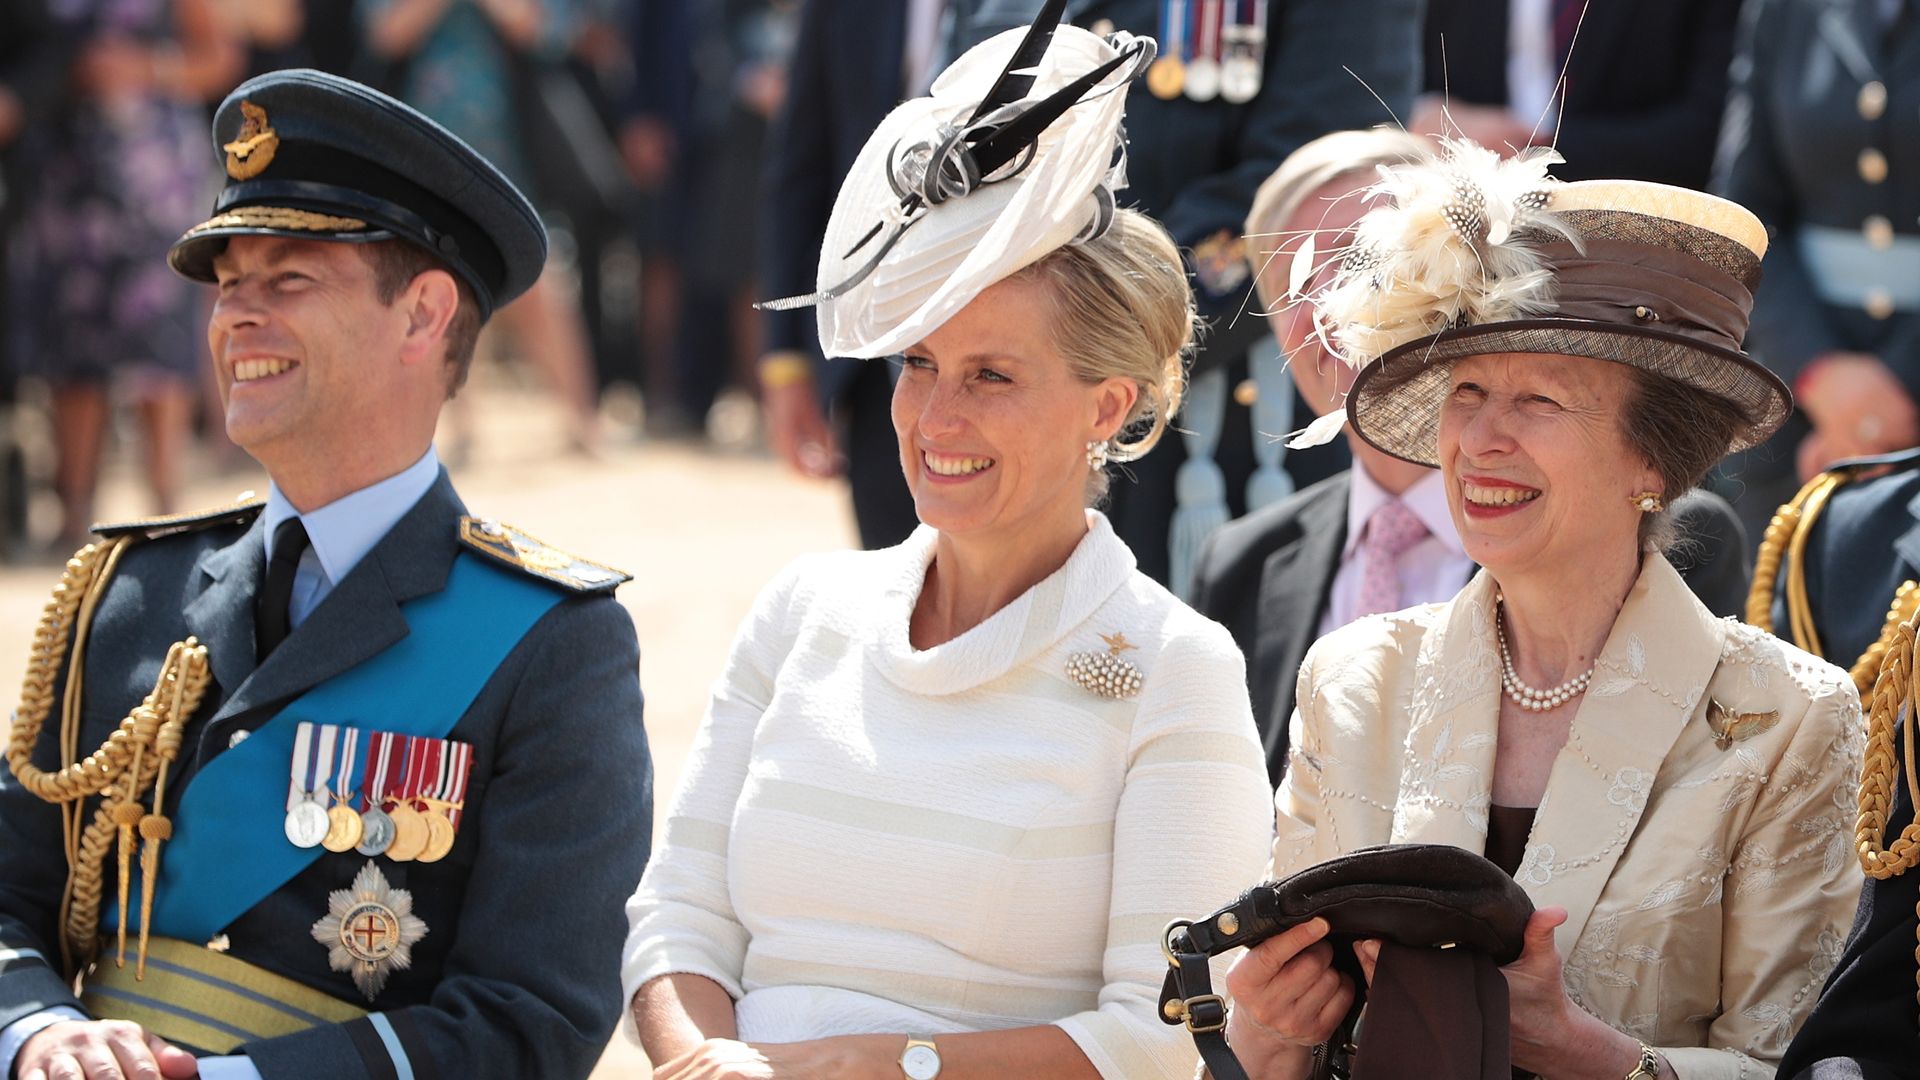 Peter Phillips reveals 'pressure' on Princess Anne, Prince Edward and Duchess Sophie amid royal health crises